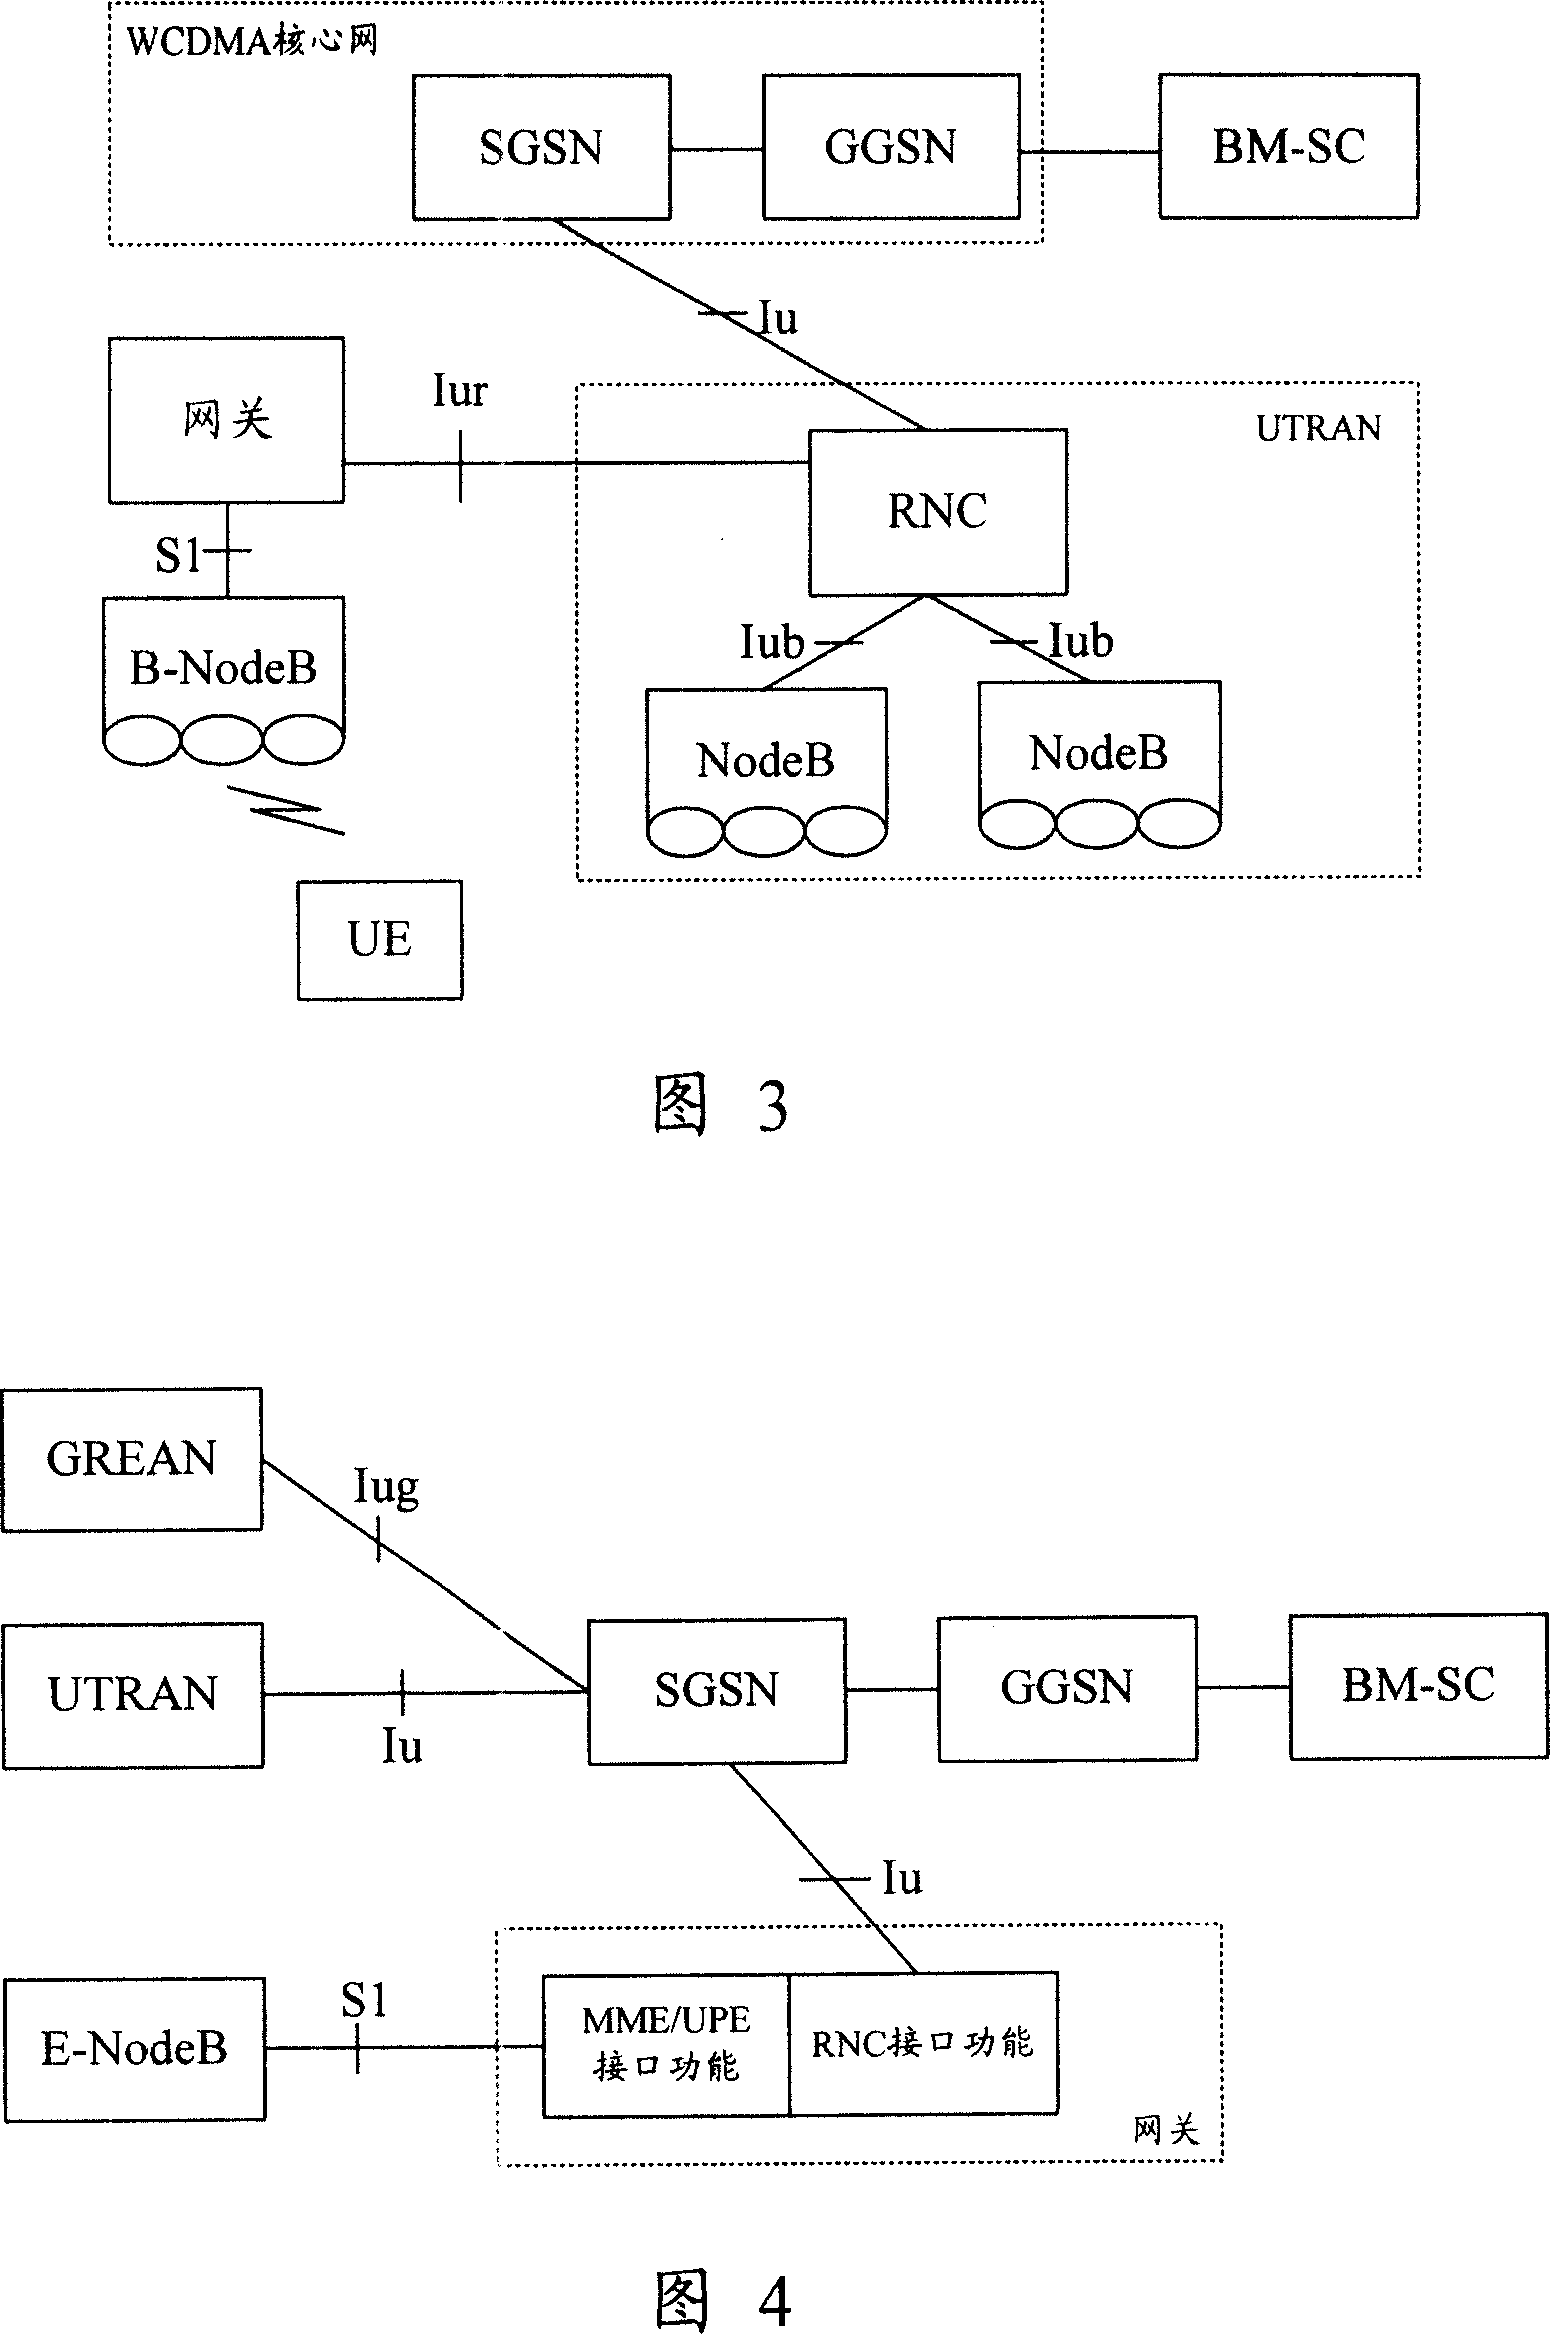 Single-carrier frequency broadcast structure and method for implementing its business transmission